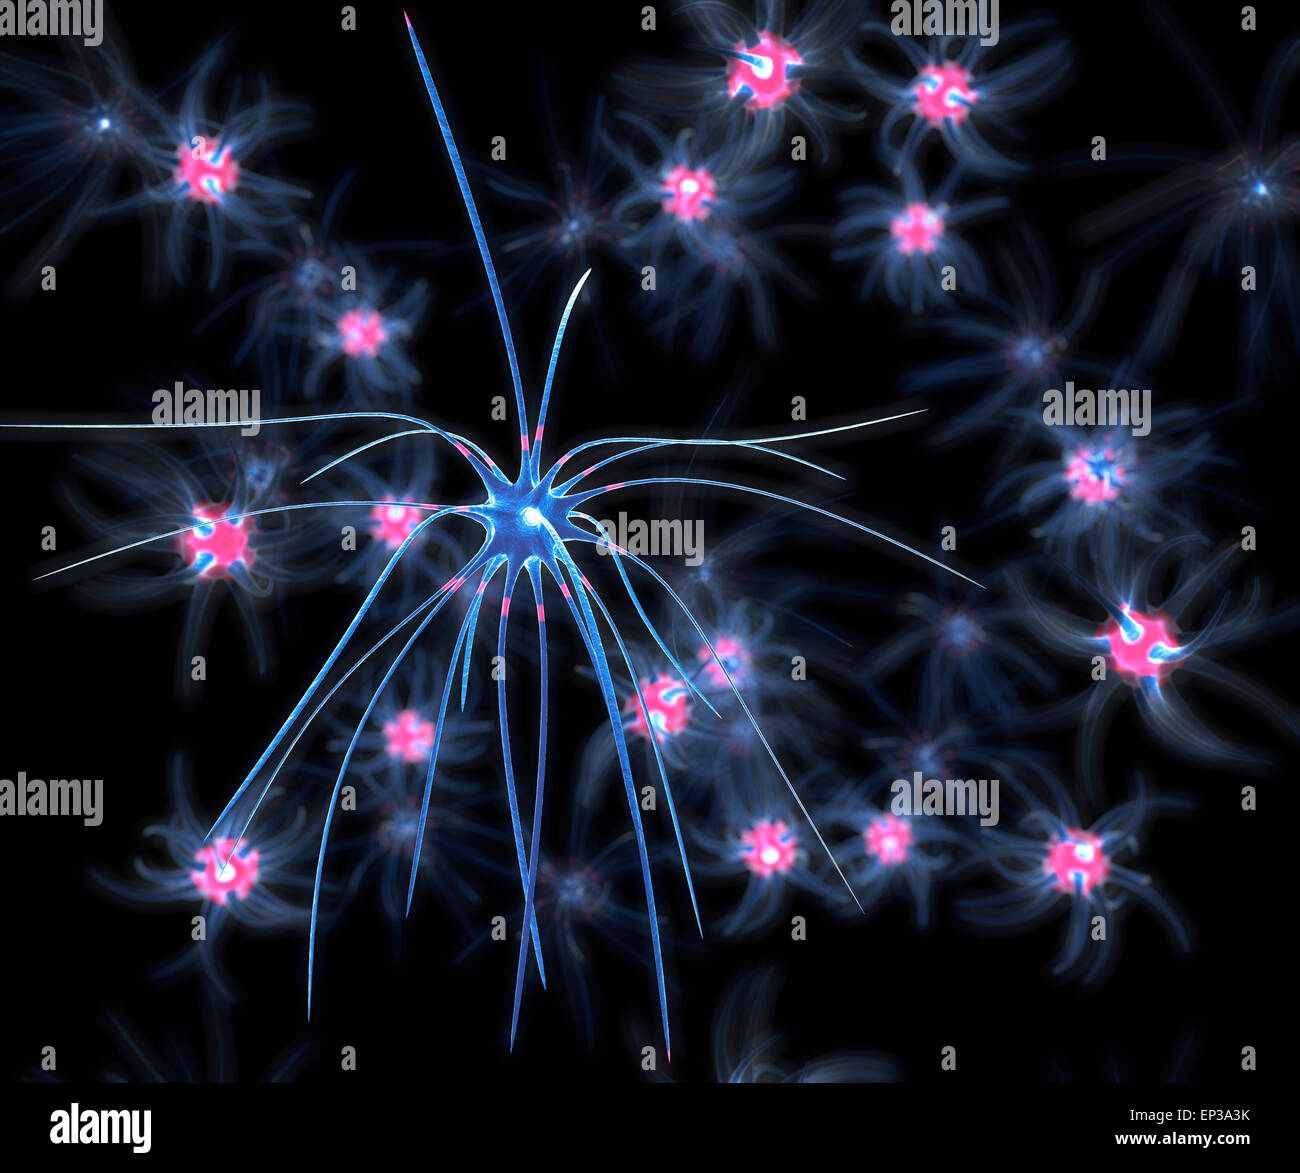 Render of group of neurons on dark background Stock Photo